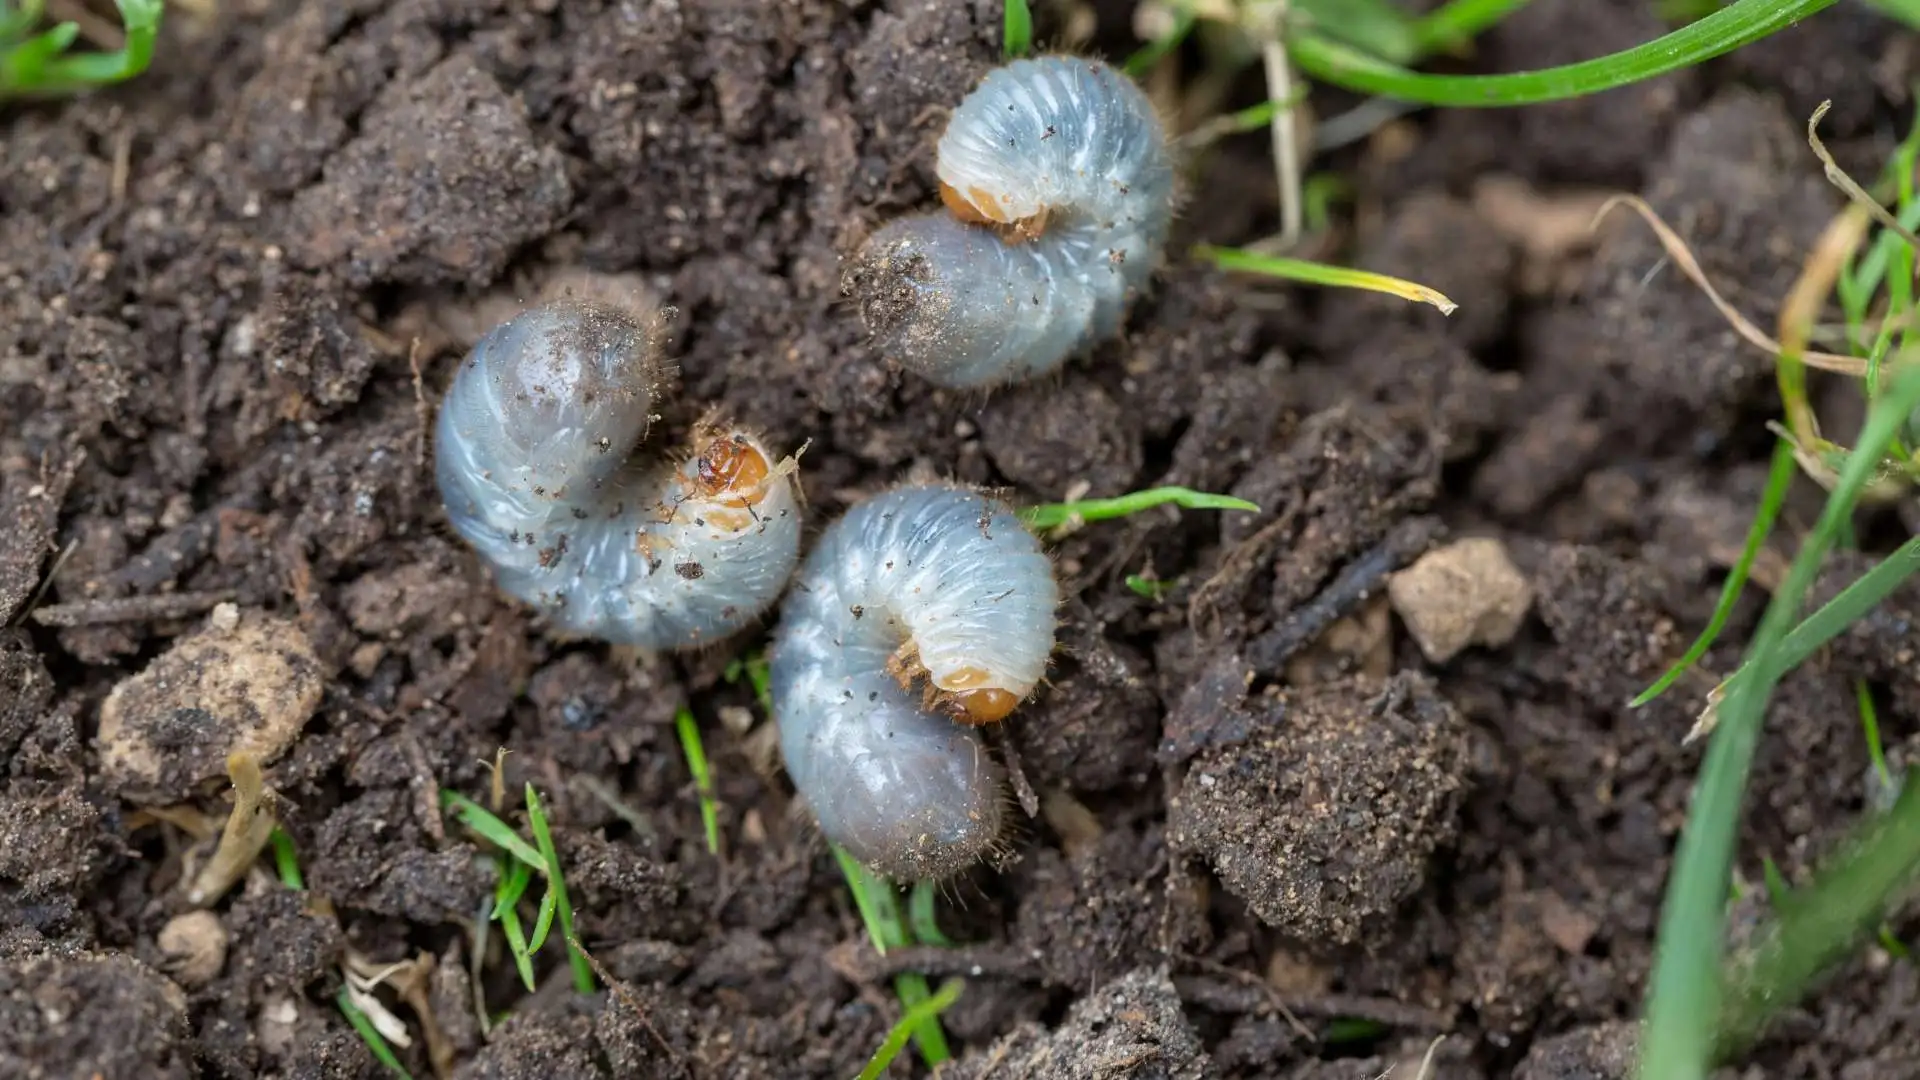 Investing in Preventative Grub Control Could Actually Save You Money